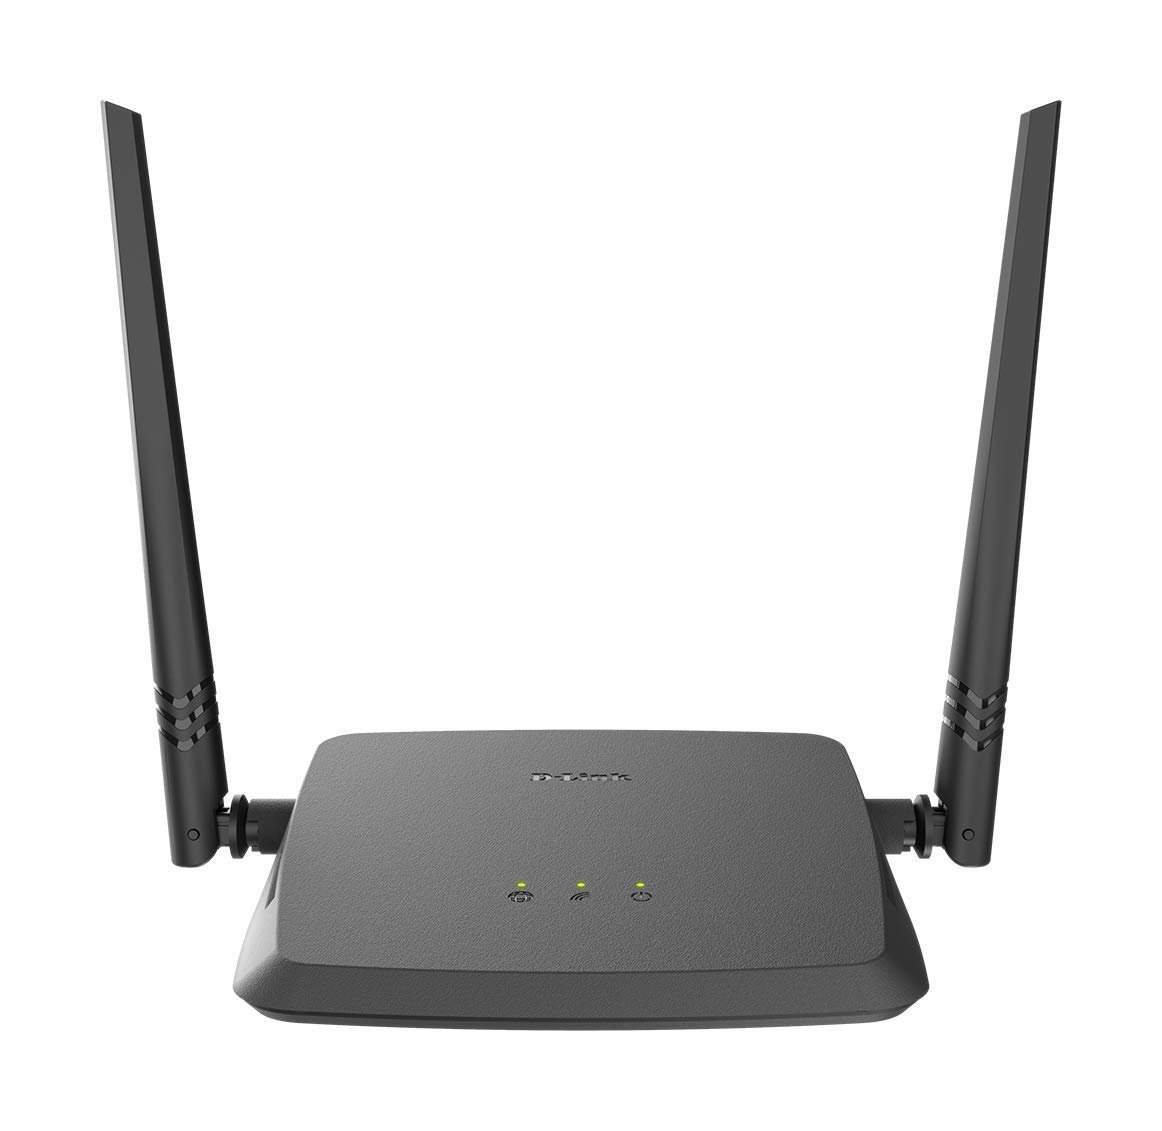 Wide Range of Wifi Routers